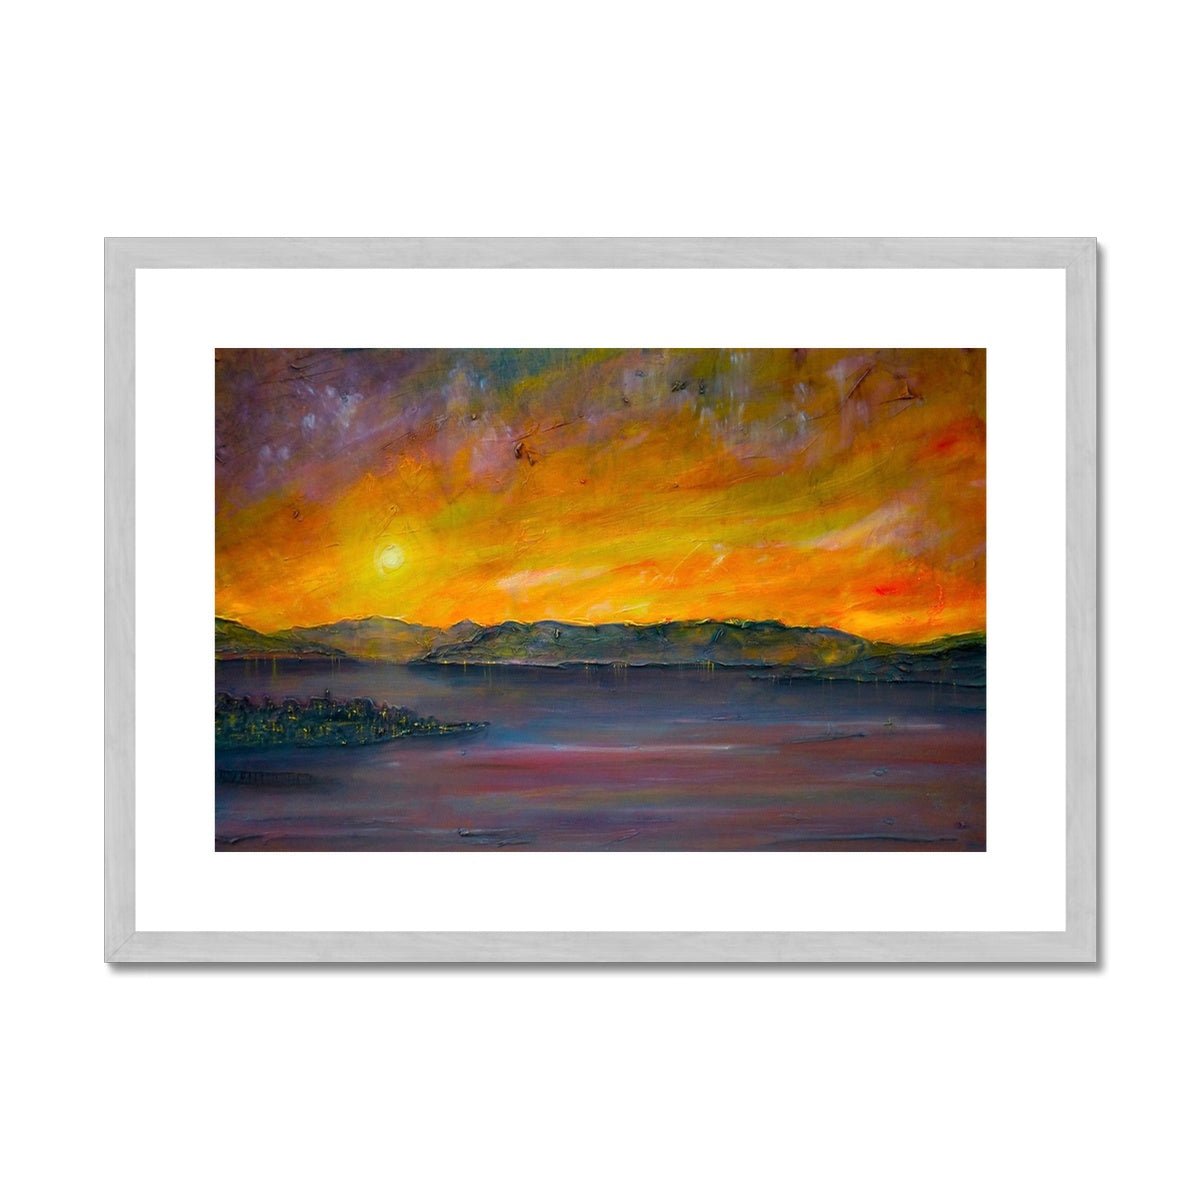 Sunset Over Gourock Painting | Antique Framed & Mounted Prints From Scotland-Antique Framed & Mounted Prints-River Clyde Art Gallery-A2 Landscape-Silver Frame-Paintings, Prints, Homeware, Art Gifts From Scotland By Scottish Artist Kevin Hunter